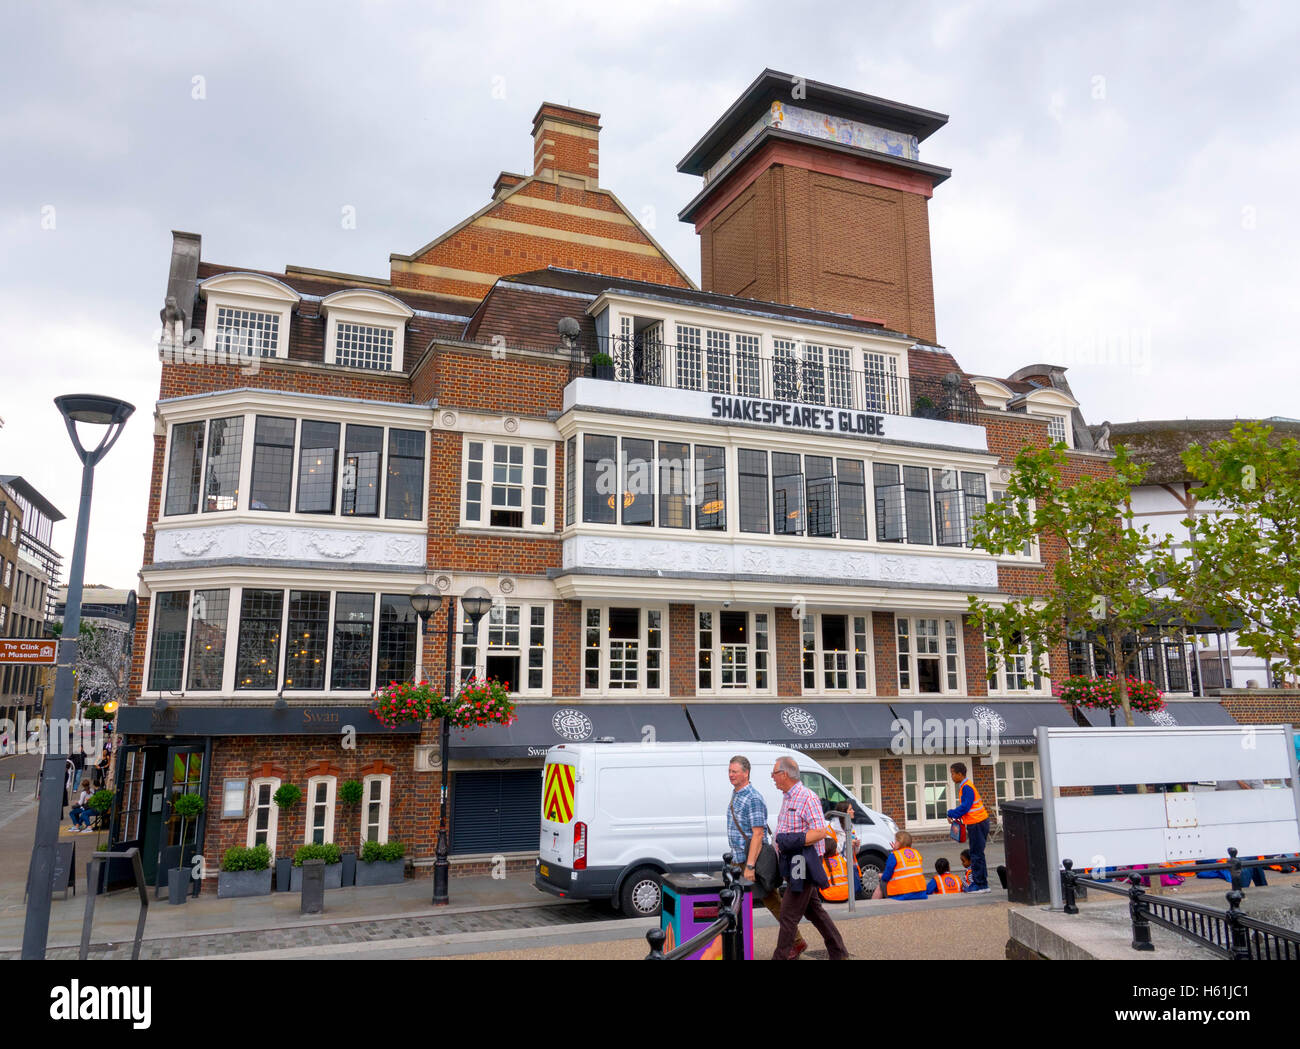 Shakespears Globe Theatre at the south bank of River Thames in London Stock Photo